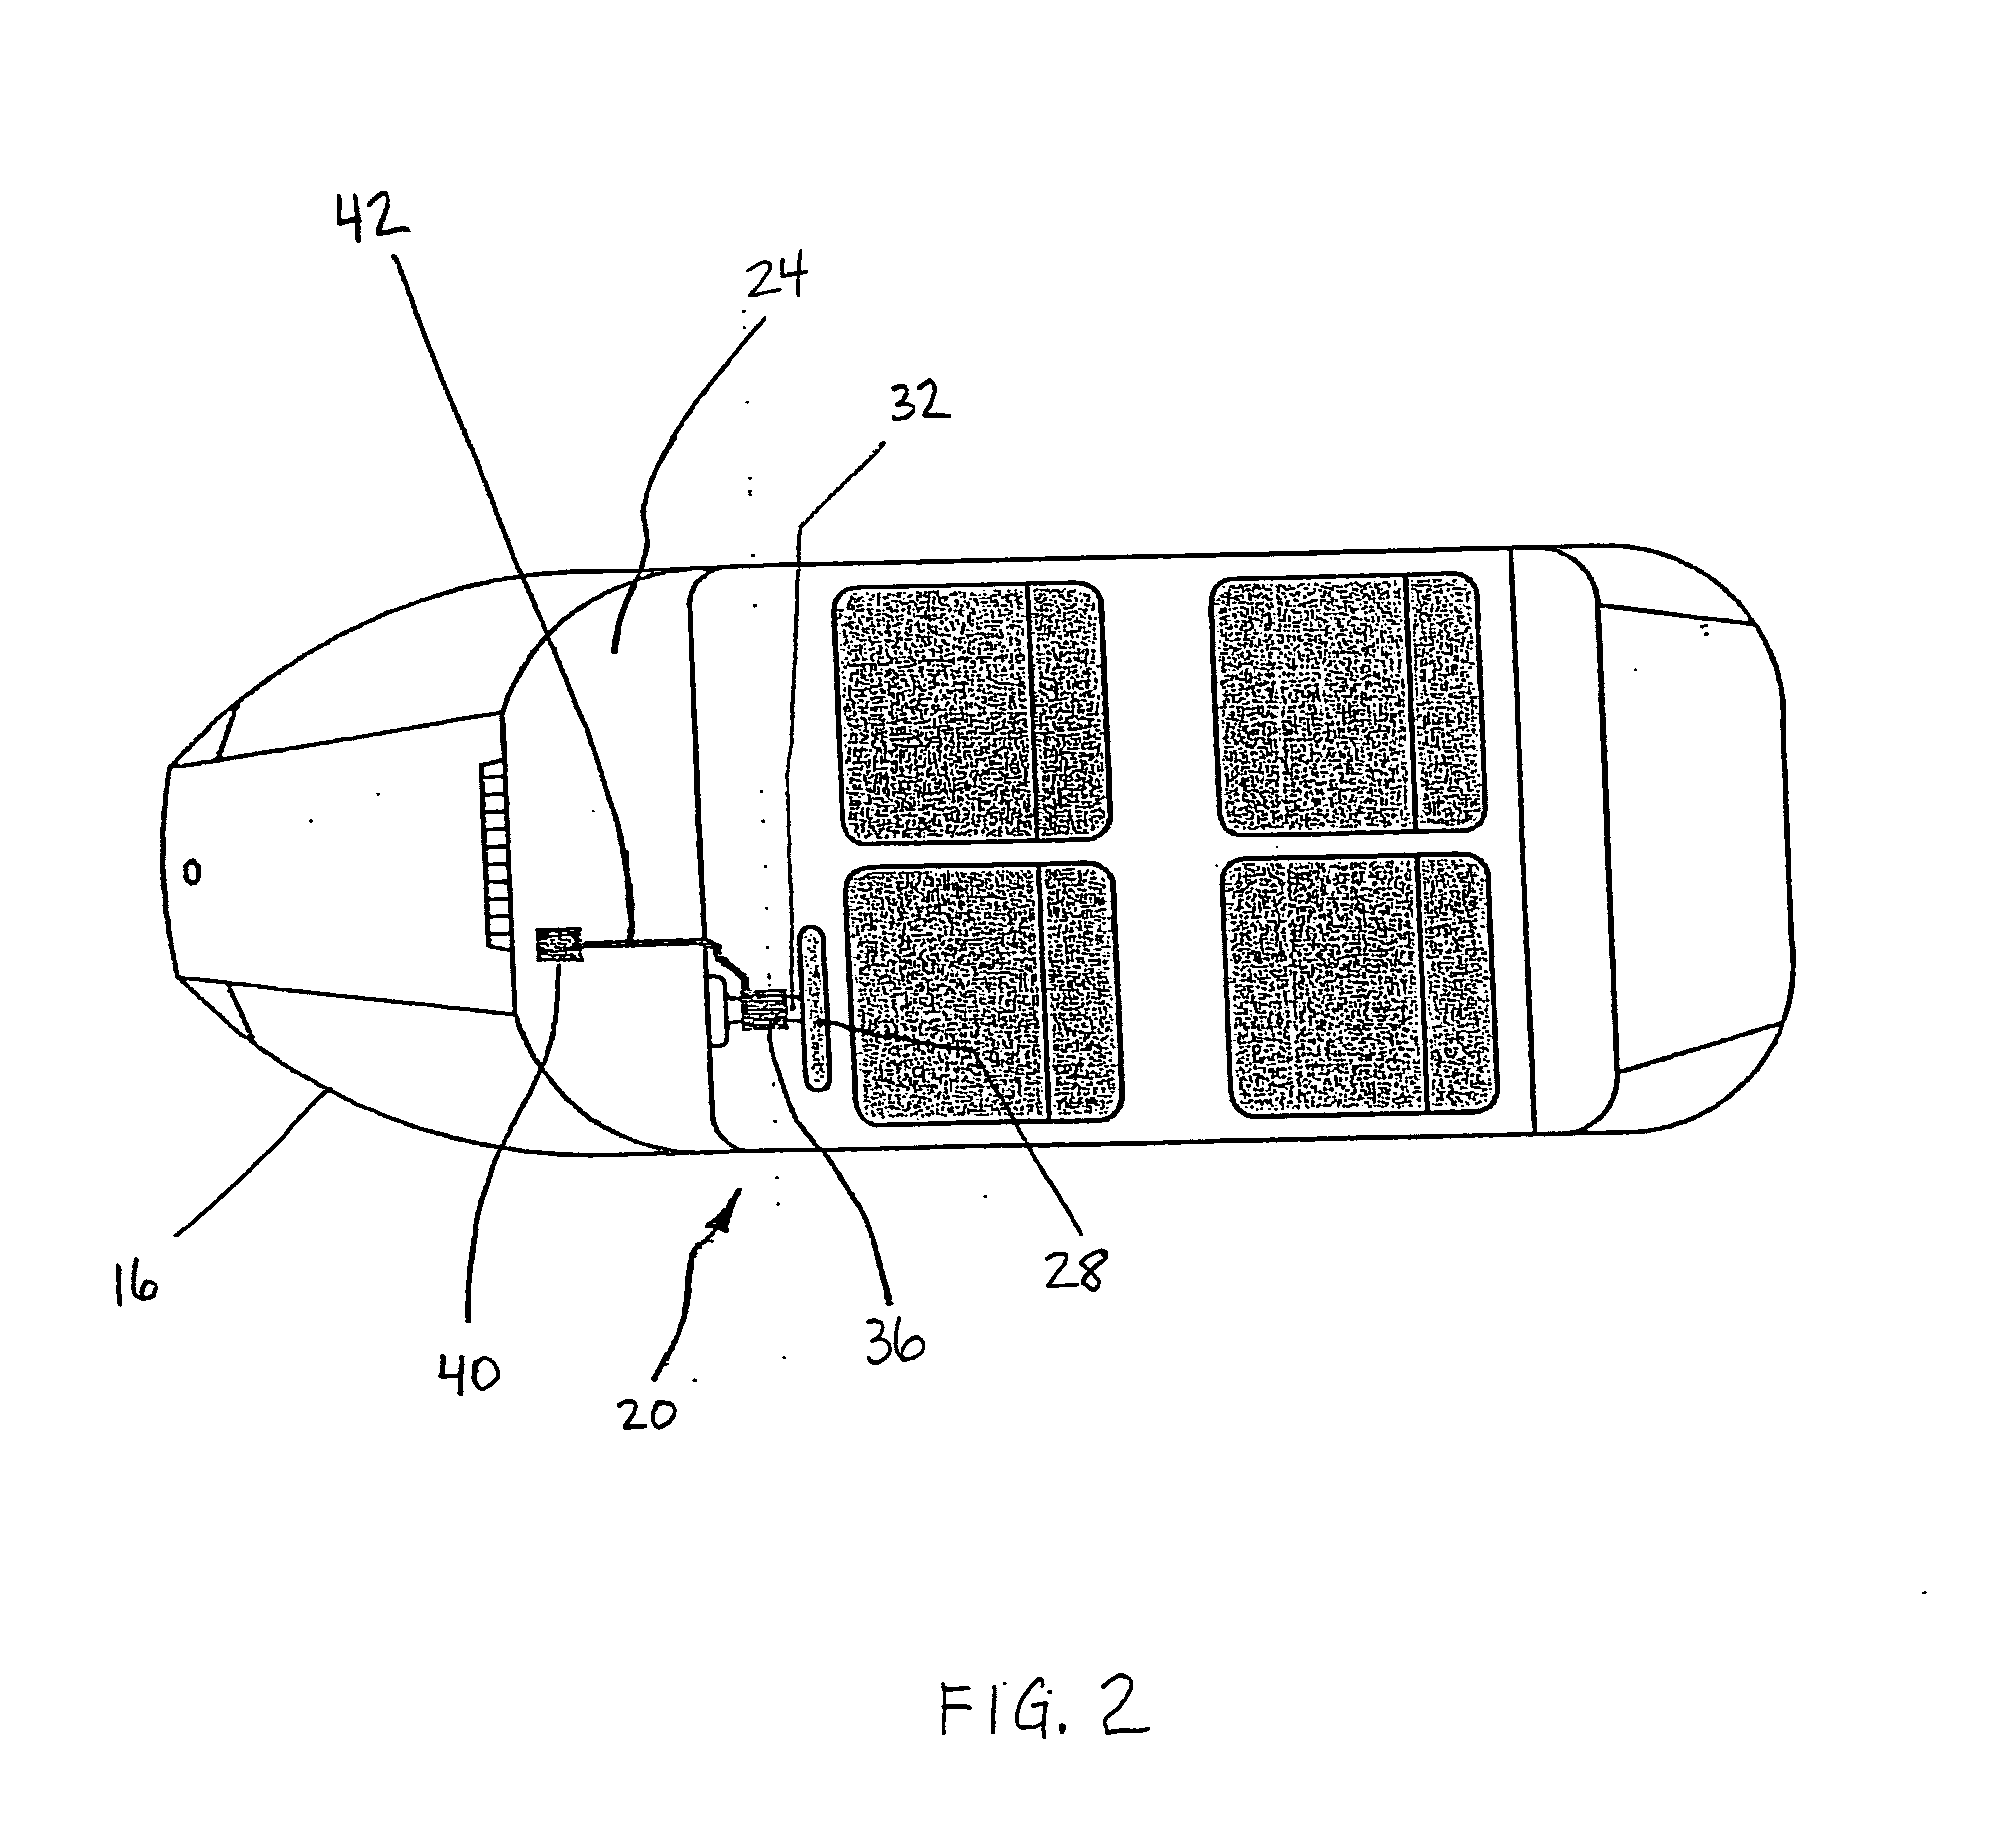 Antenna system for remote control automotive application